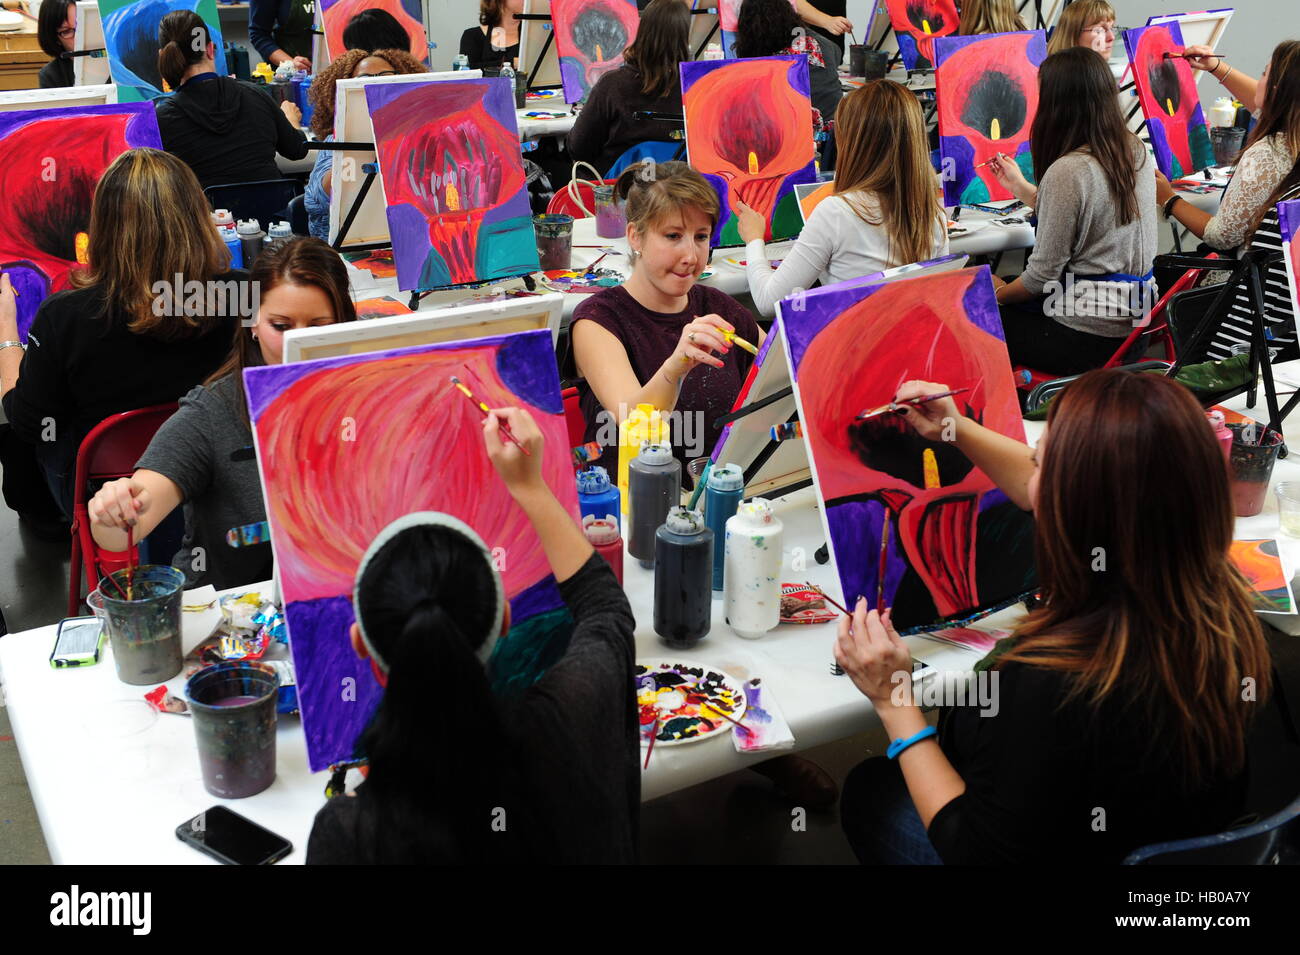 Adult education art class people learning to paint flowers in an evening classroom Stock Photo